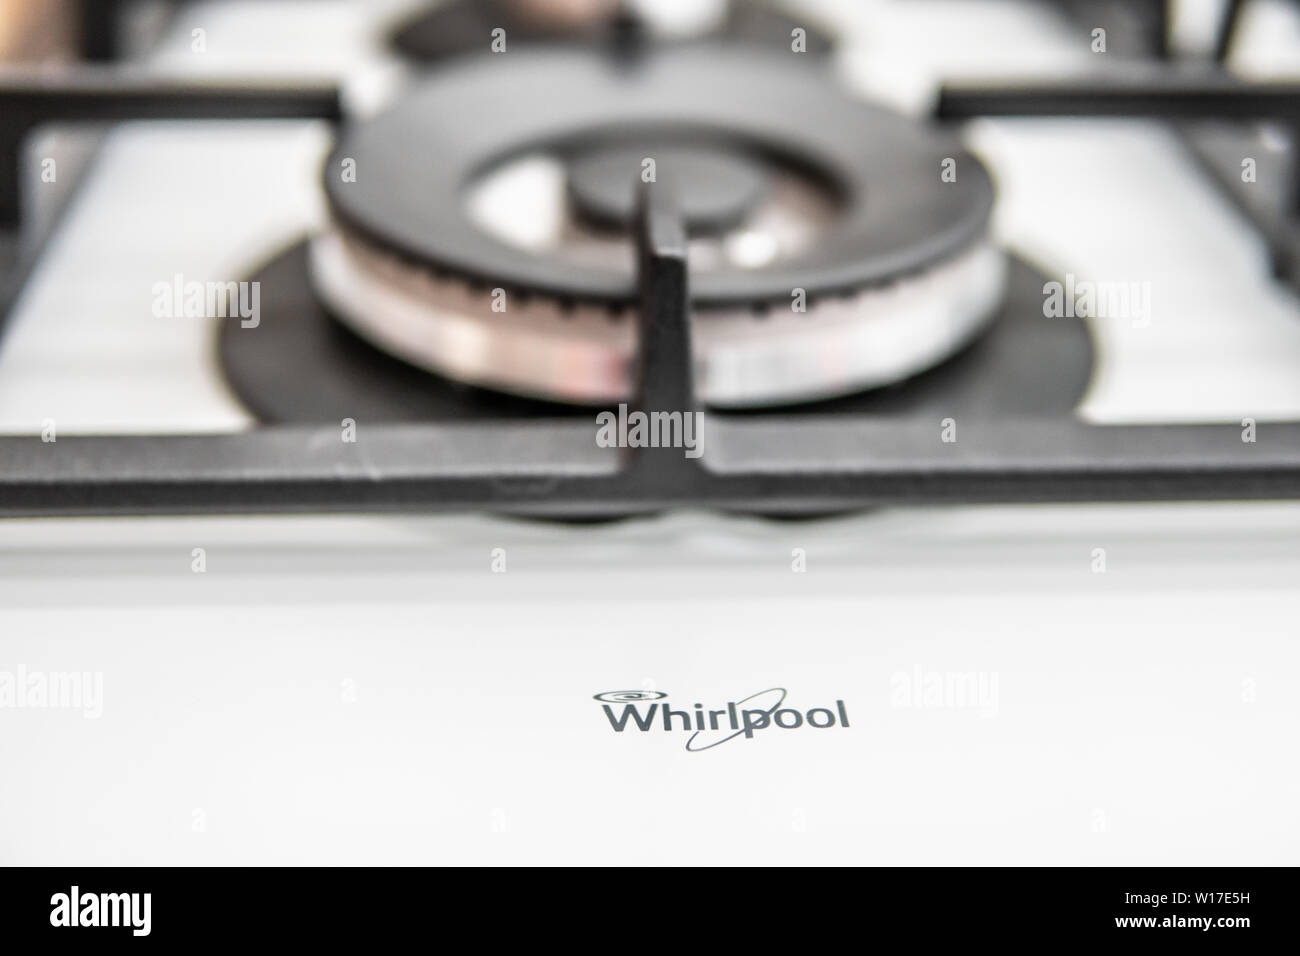 Lodz, Poland, July 2018 inside Saturn electronic store, Whirlpool gas hobs produced by Whirlpool Corporation American manufacturer of home appliances Stock Photo